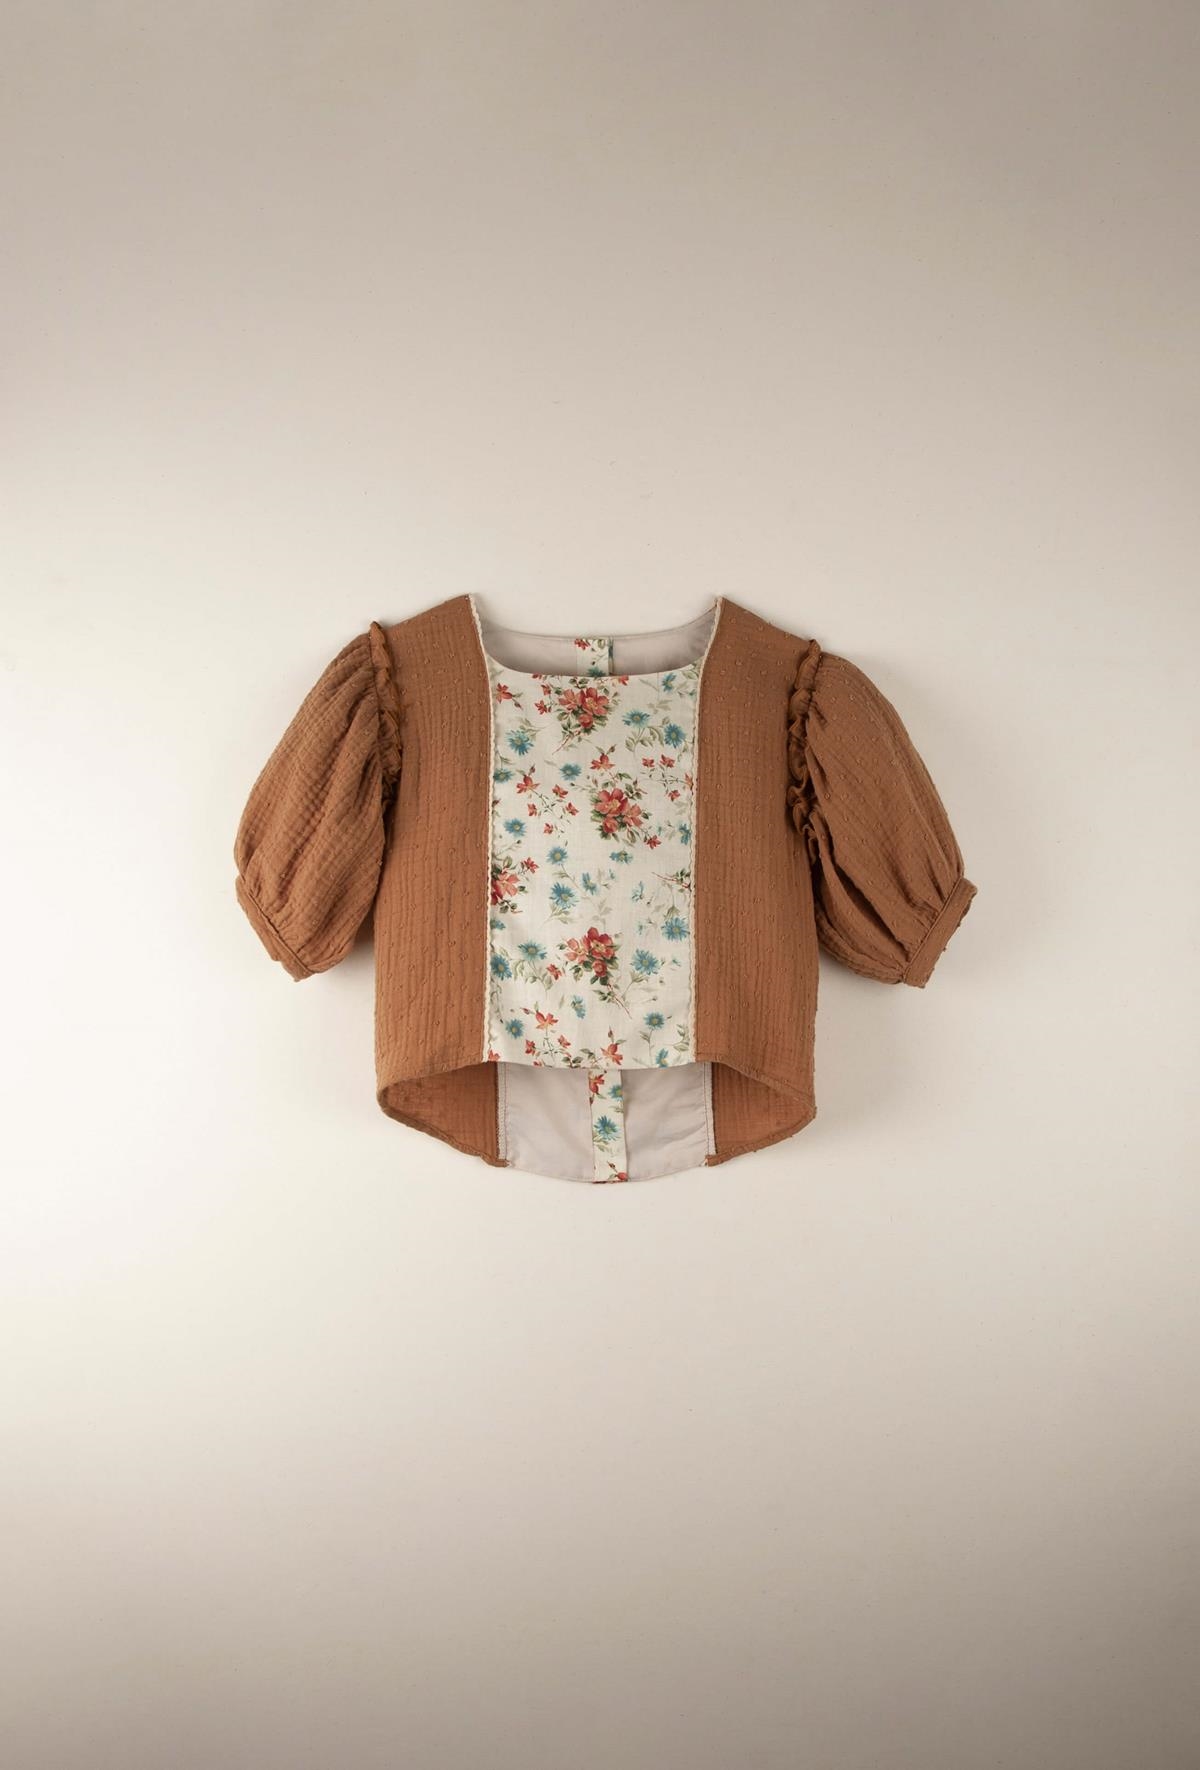 Mod.18.2 Terracotta organic blouse with puffed sleeve | SS22 Mod.18.2 Terracotta organic blouse with puffed sleeve | 1